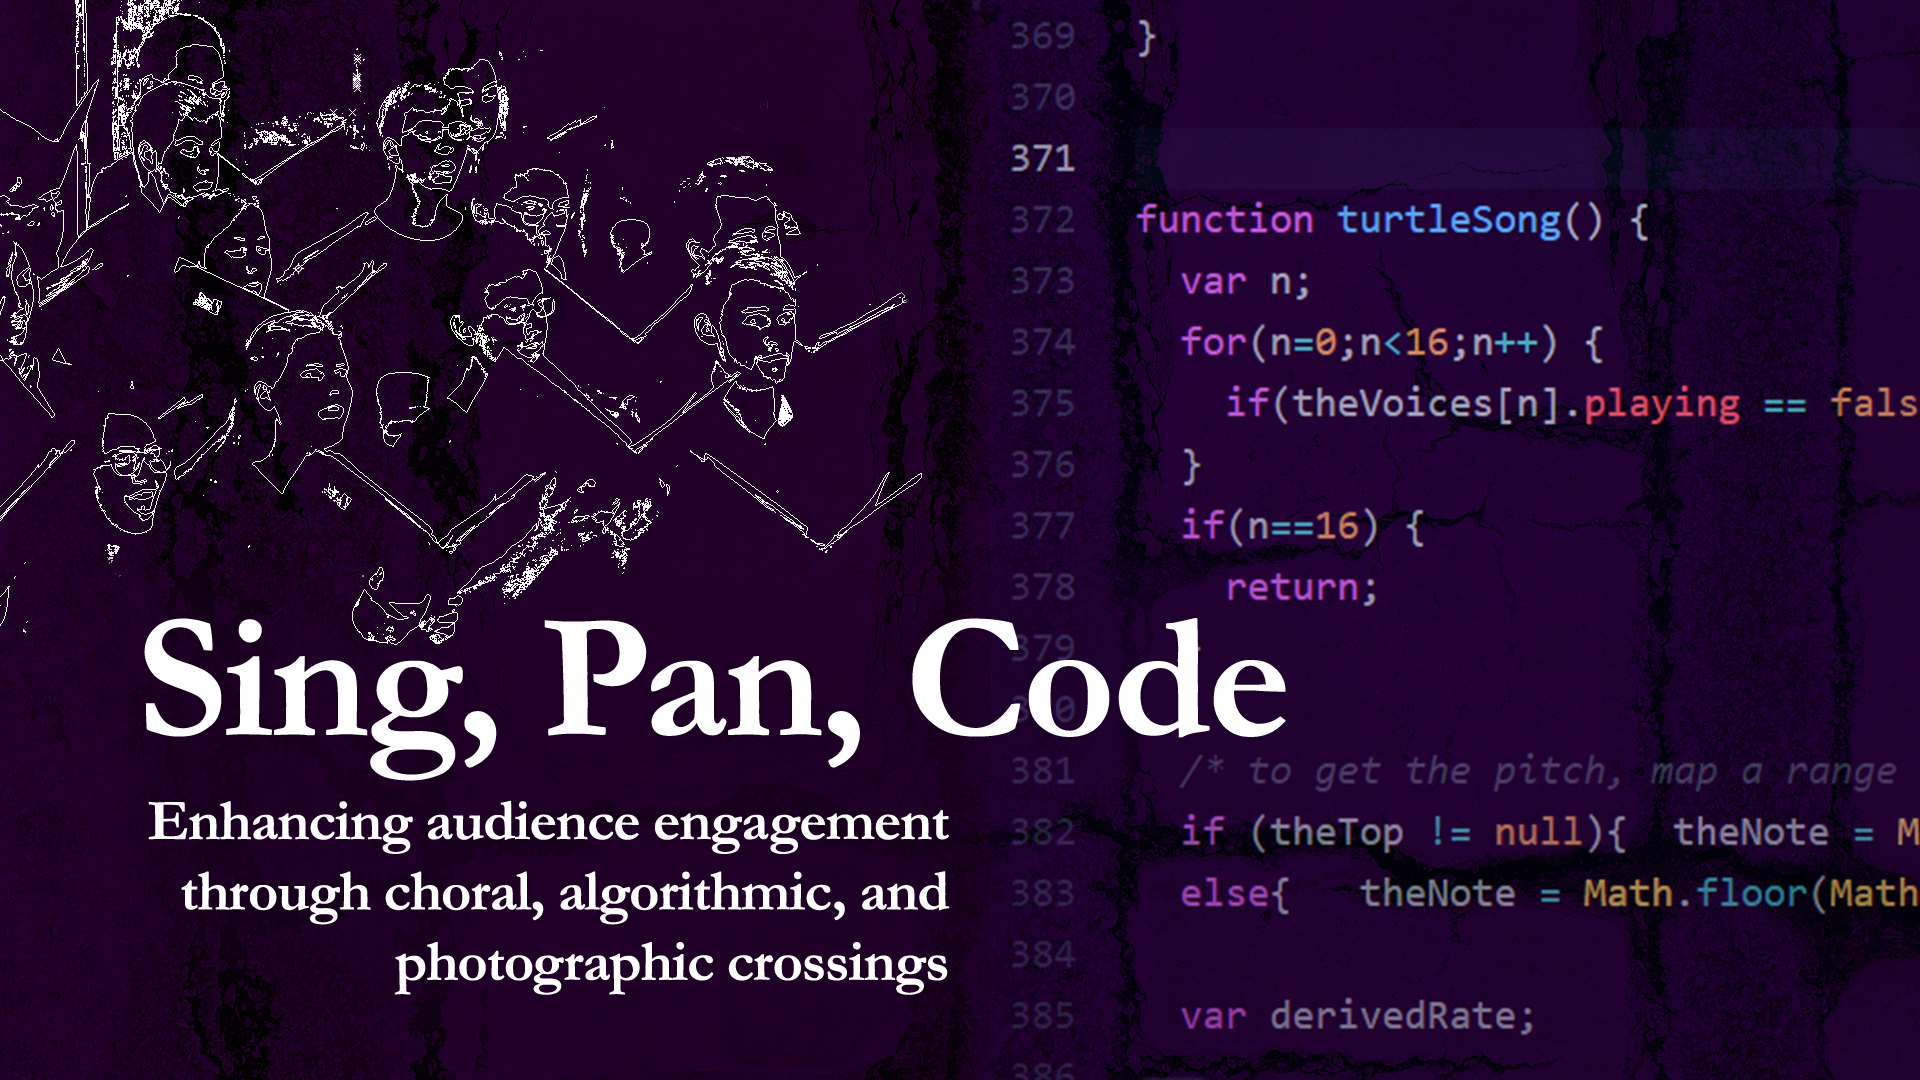 Sing, Pan, Code: Enhancing Audience Engagement Through Choral, Algorithmic, and Photographic Crossings